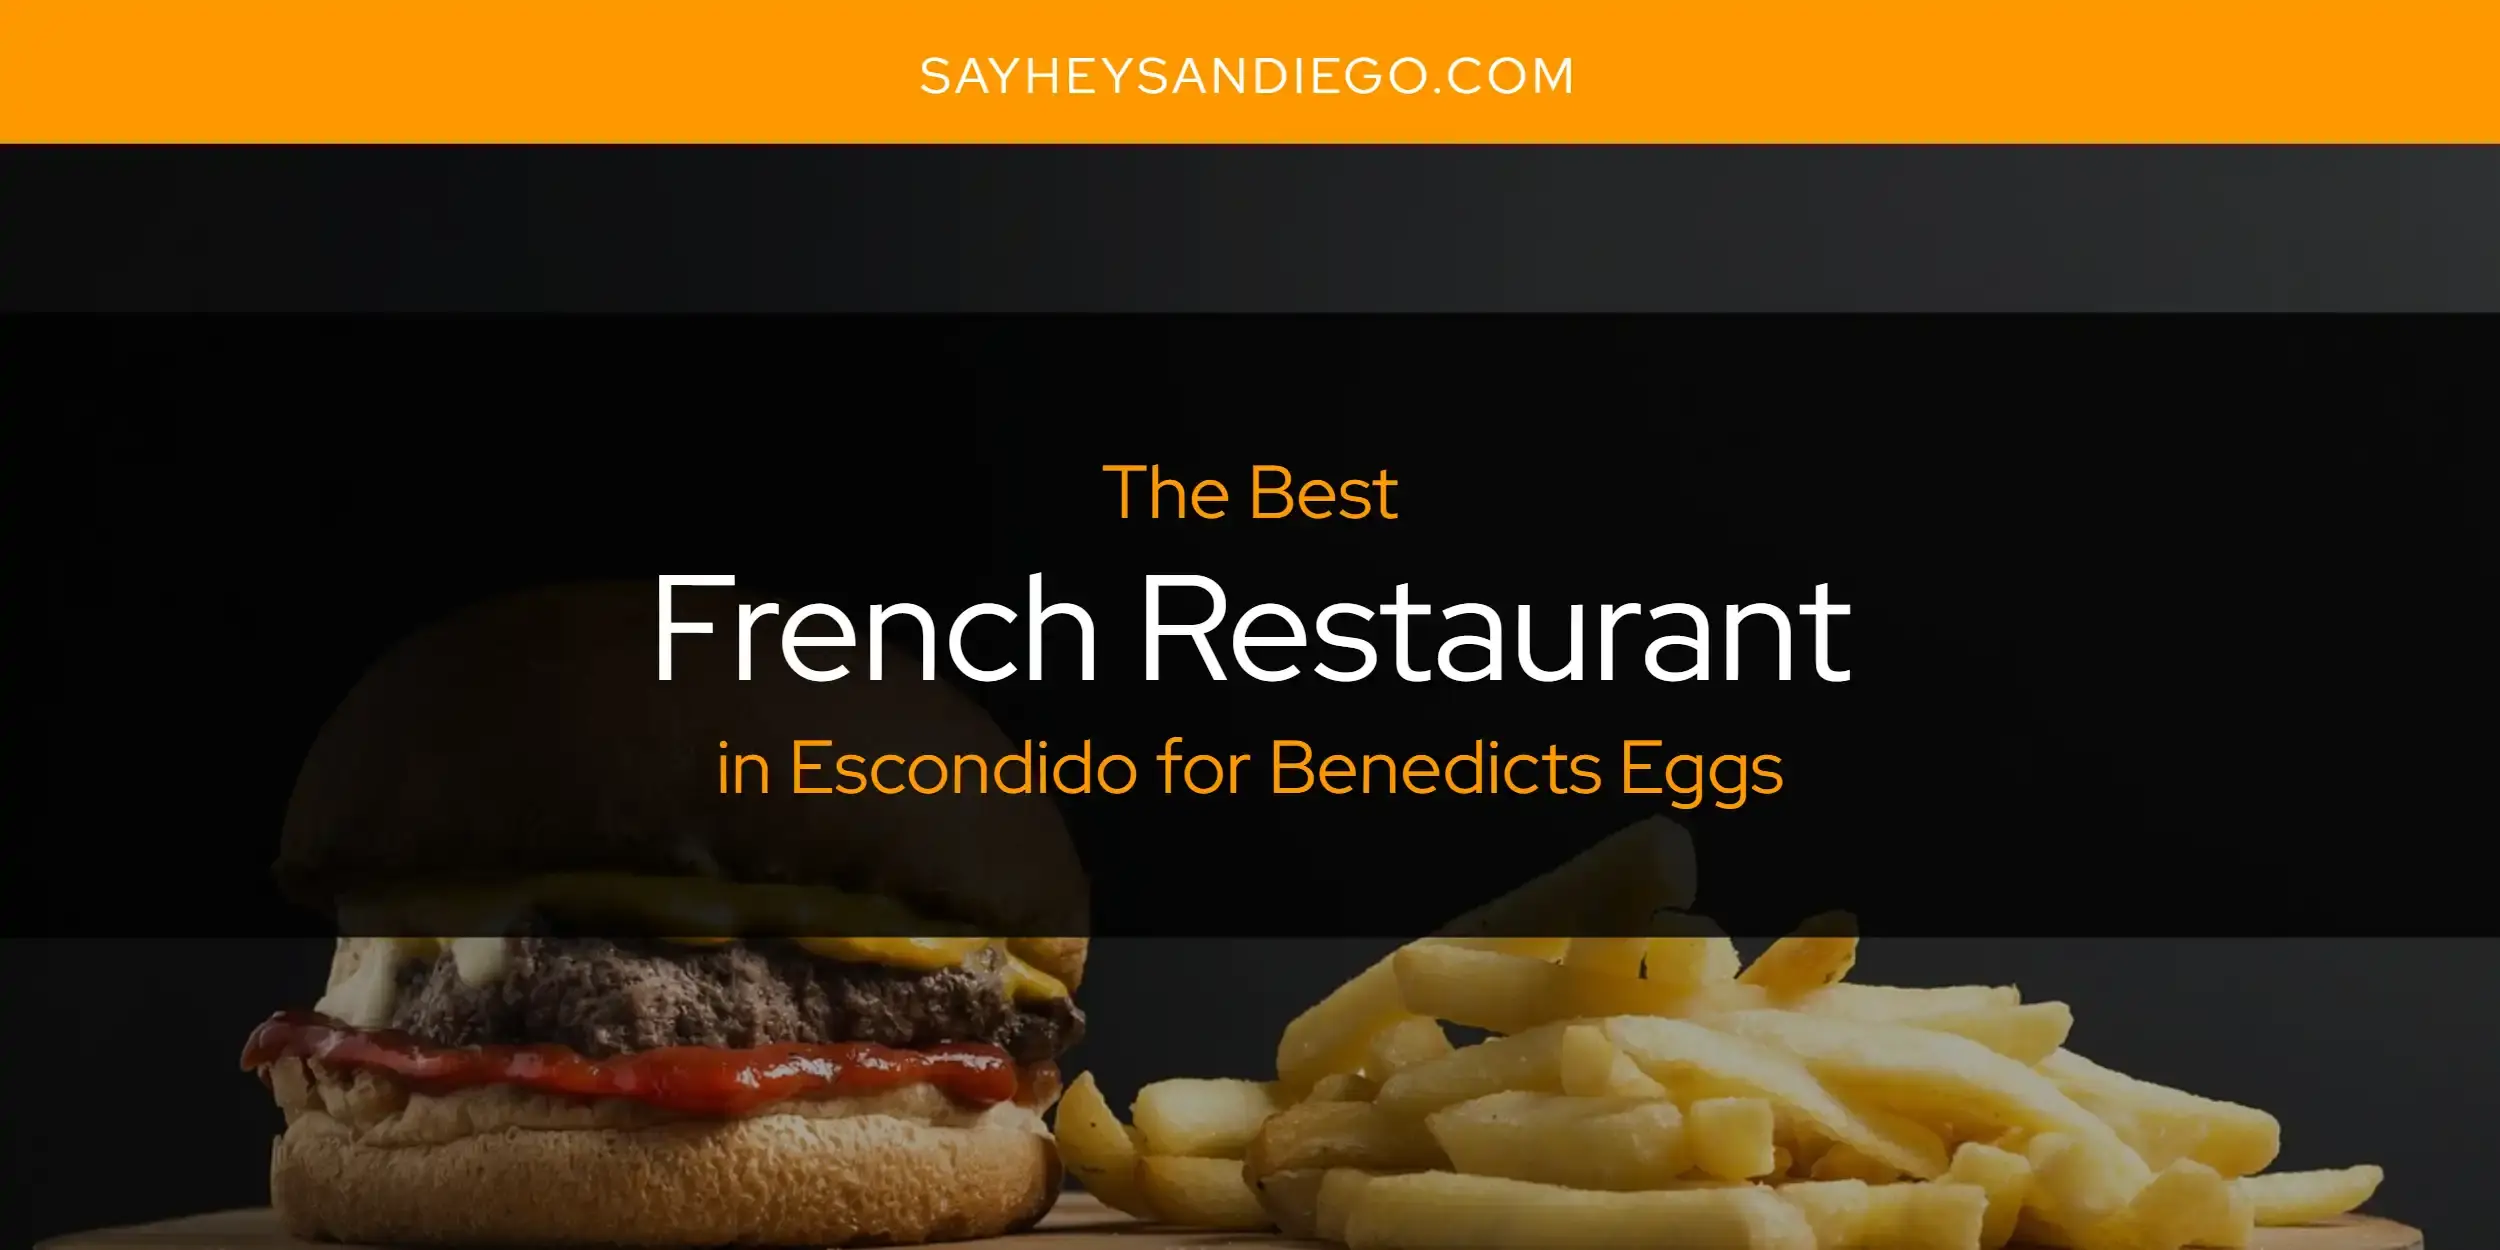 Best French Restaurant in Escondido for Benedicts Eggs? Here's the Top 13